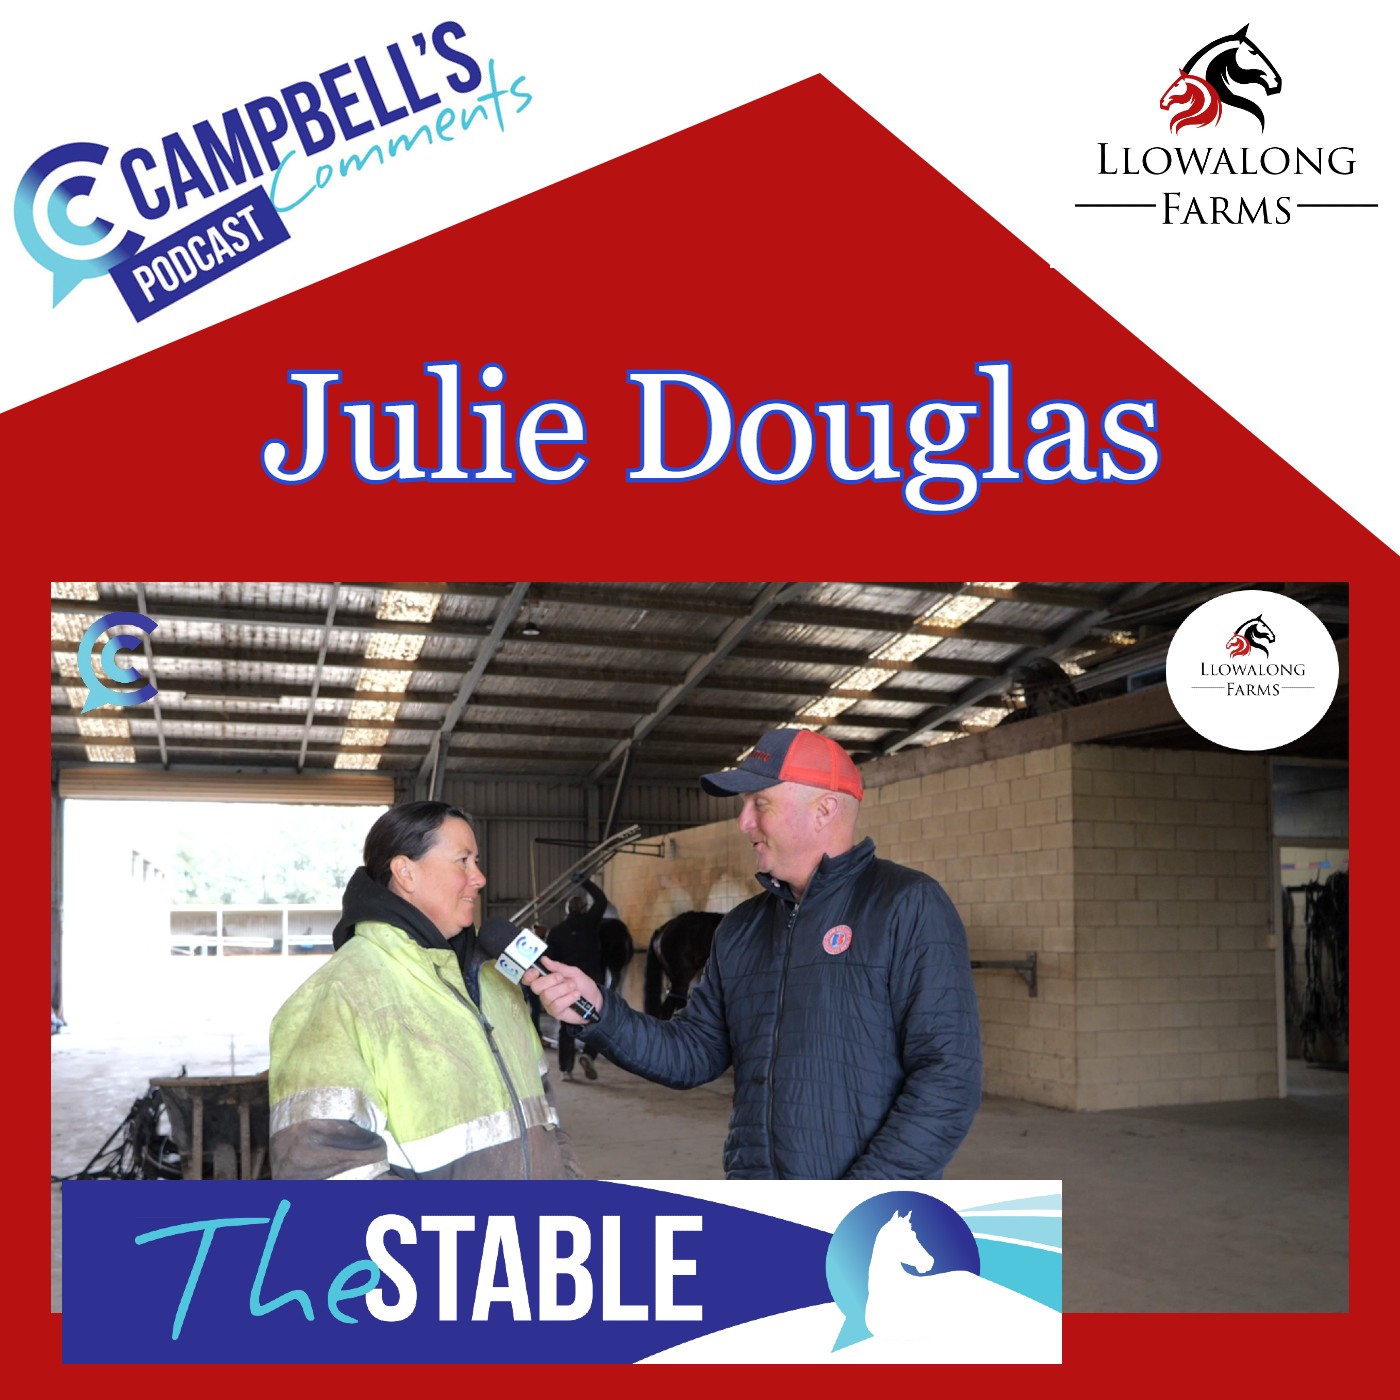 You are currently viewing 197: Campbells Comments with Julie Douglas